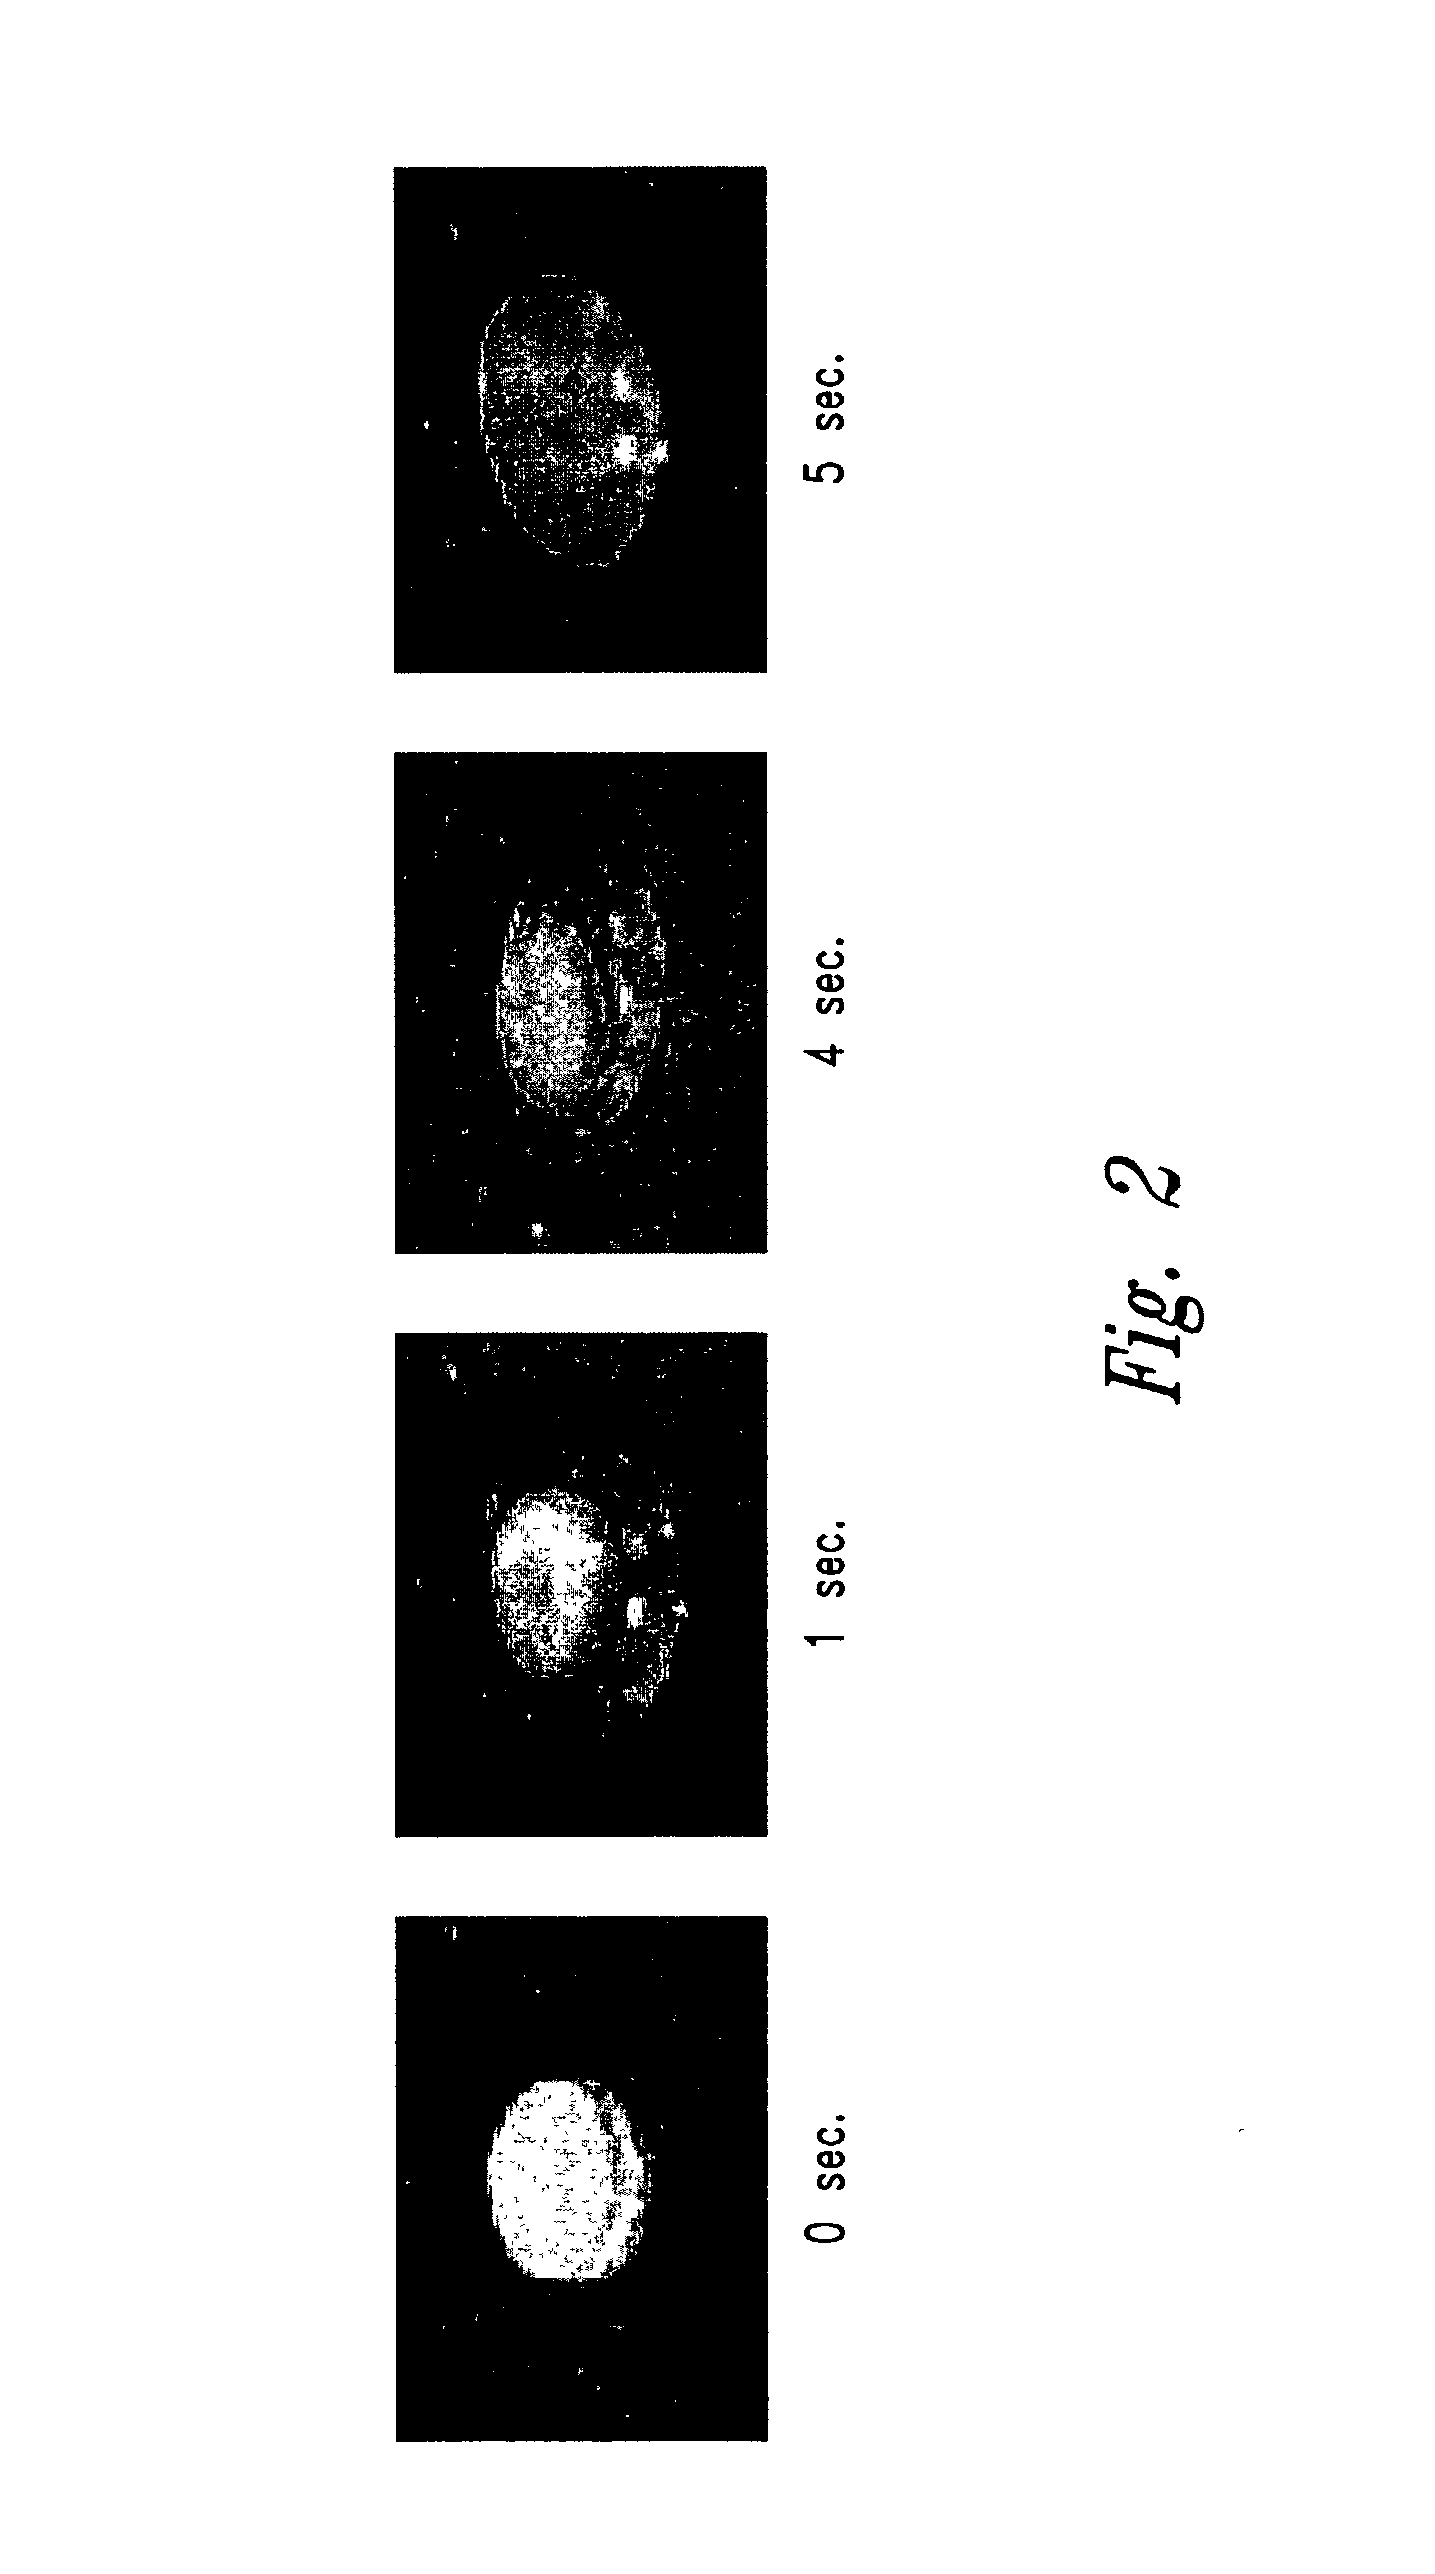 Dosage form exhibiting rapid disperse properties, methods of use and process for the manufacture of same